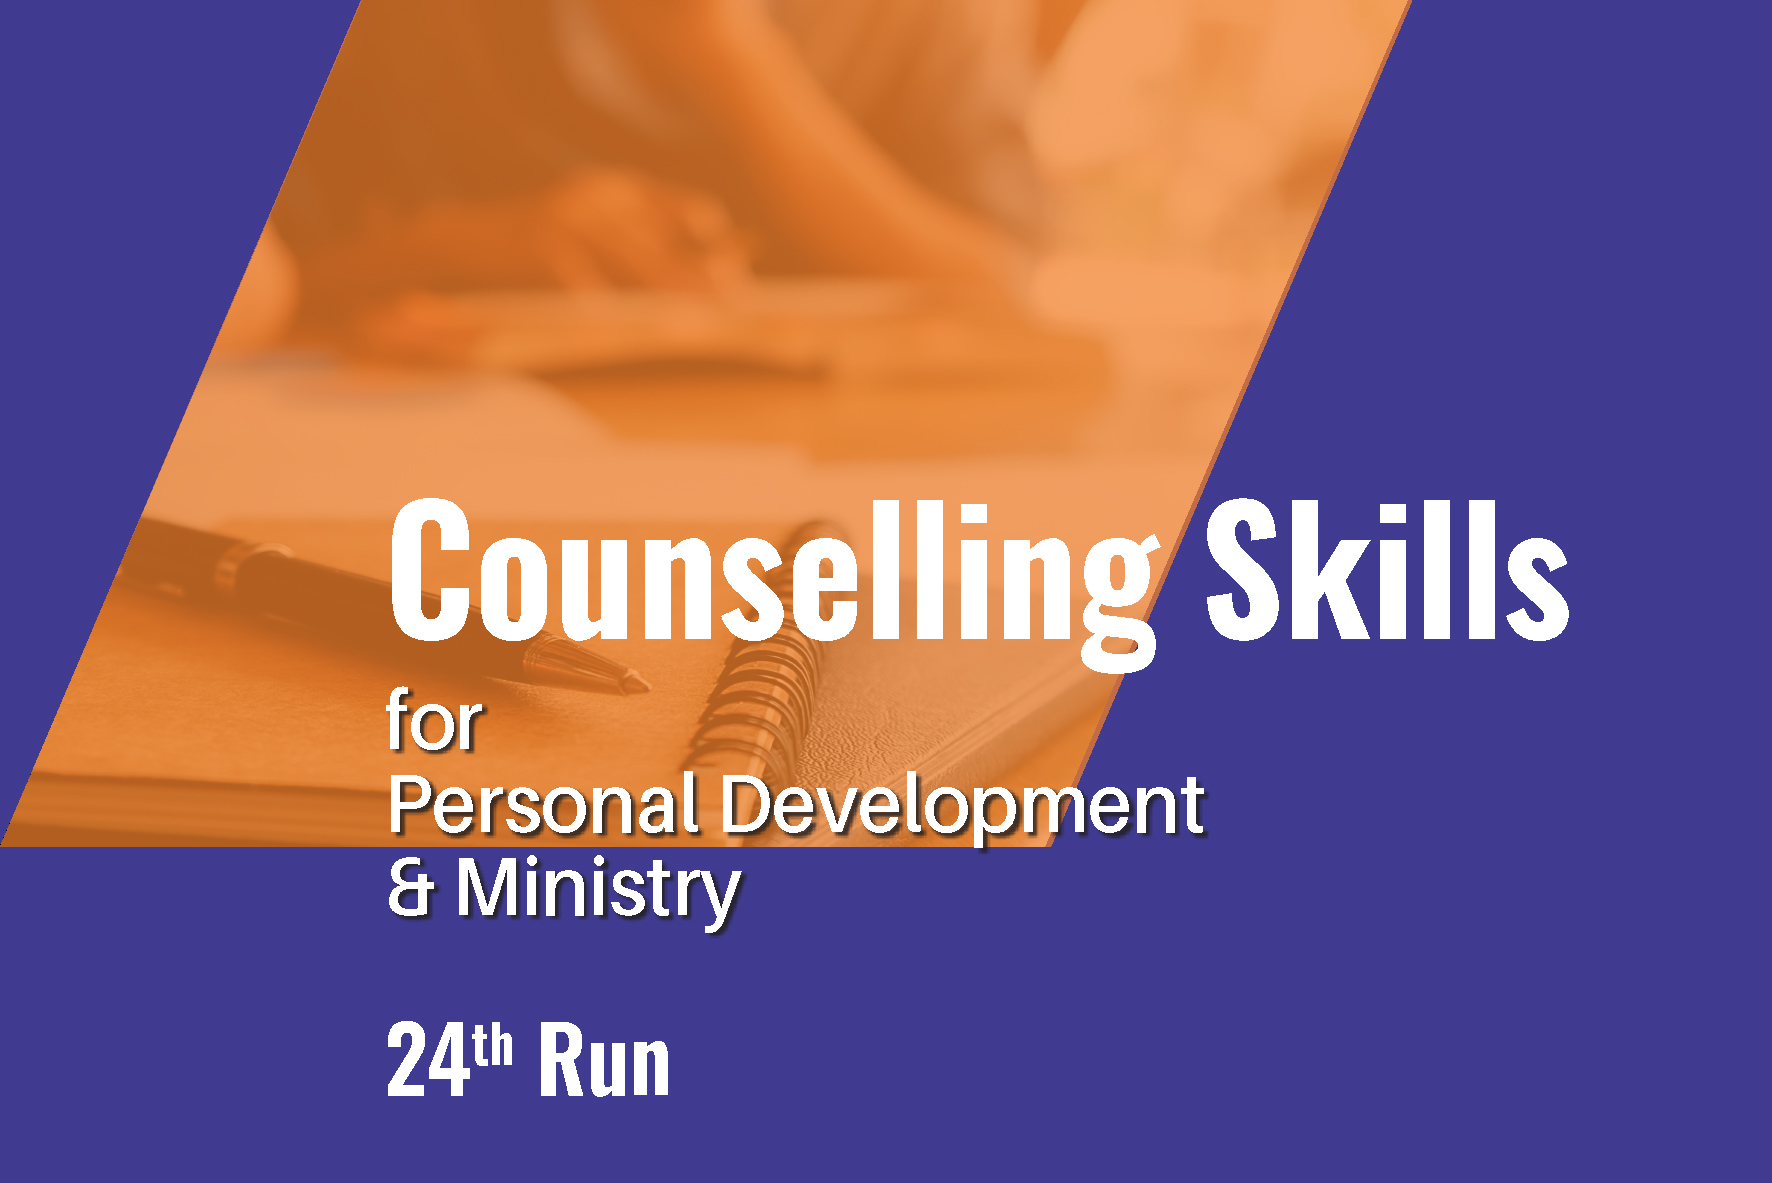 Counselling Skills for Personal Development & Ministry 24th Run